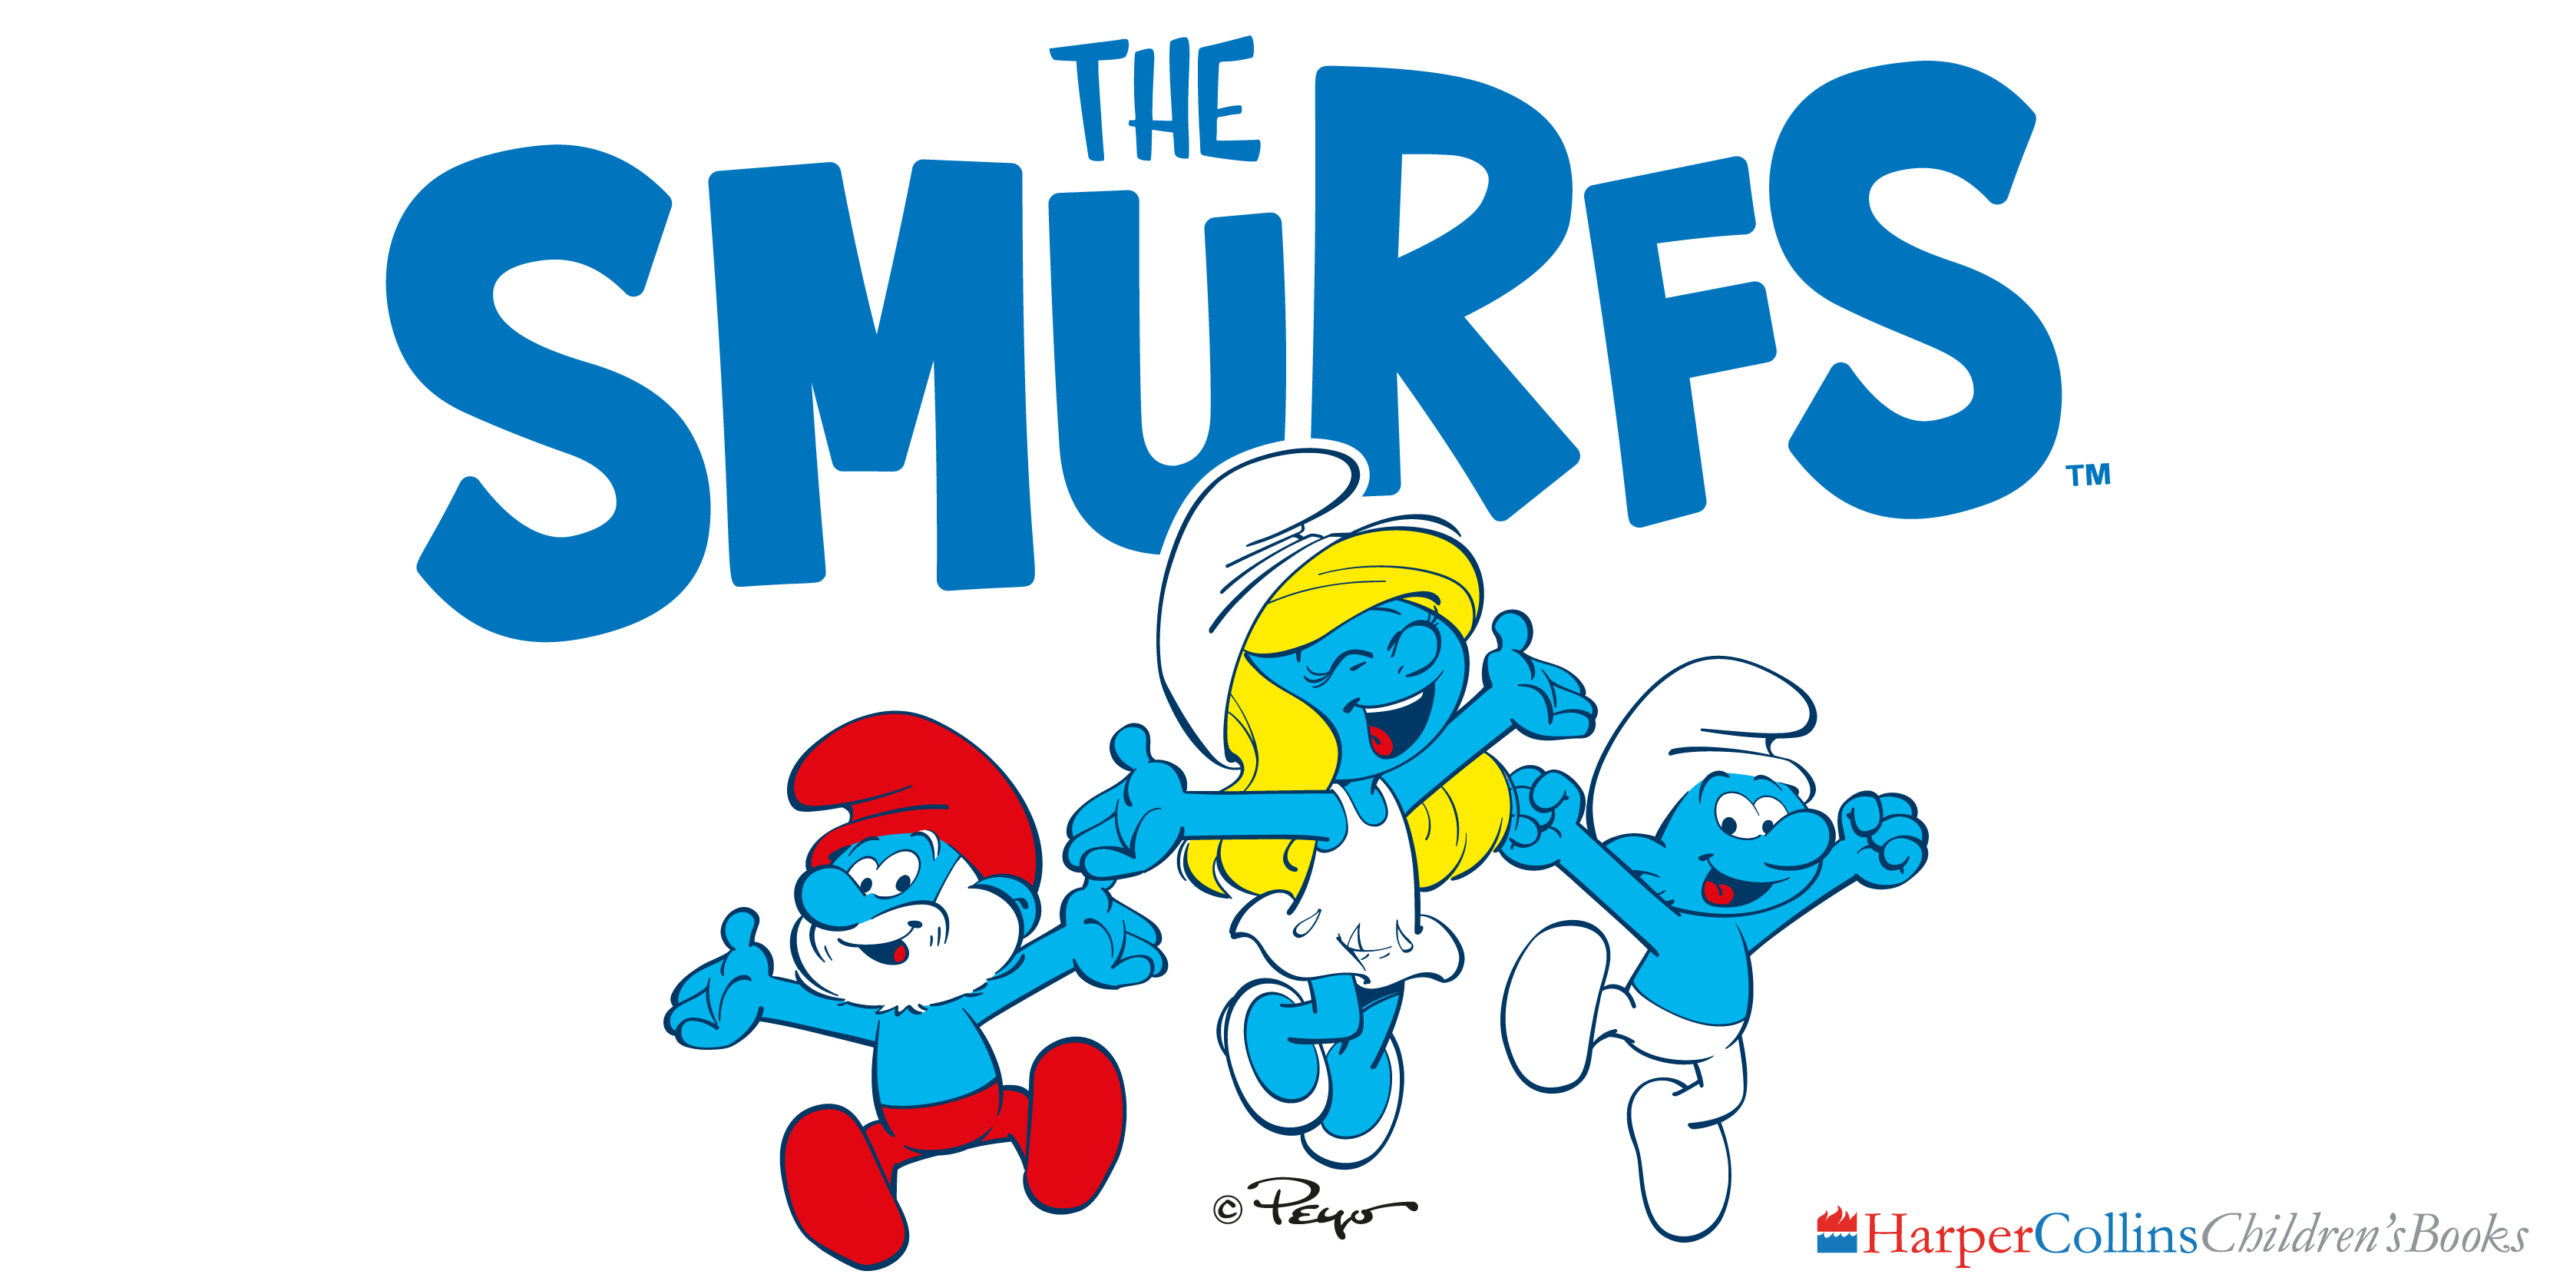 Smurfs x HarperCollins announces to publish its books in the Indian subcontinent.